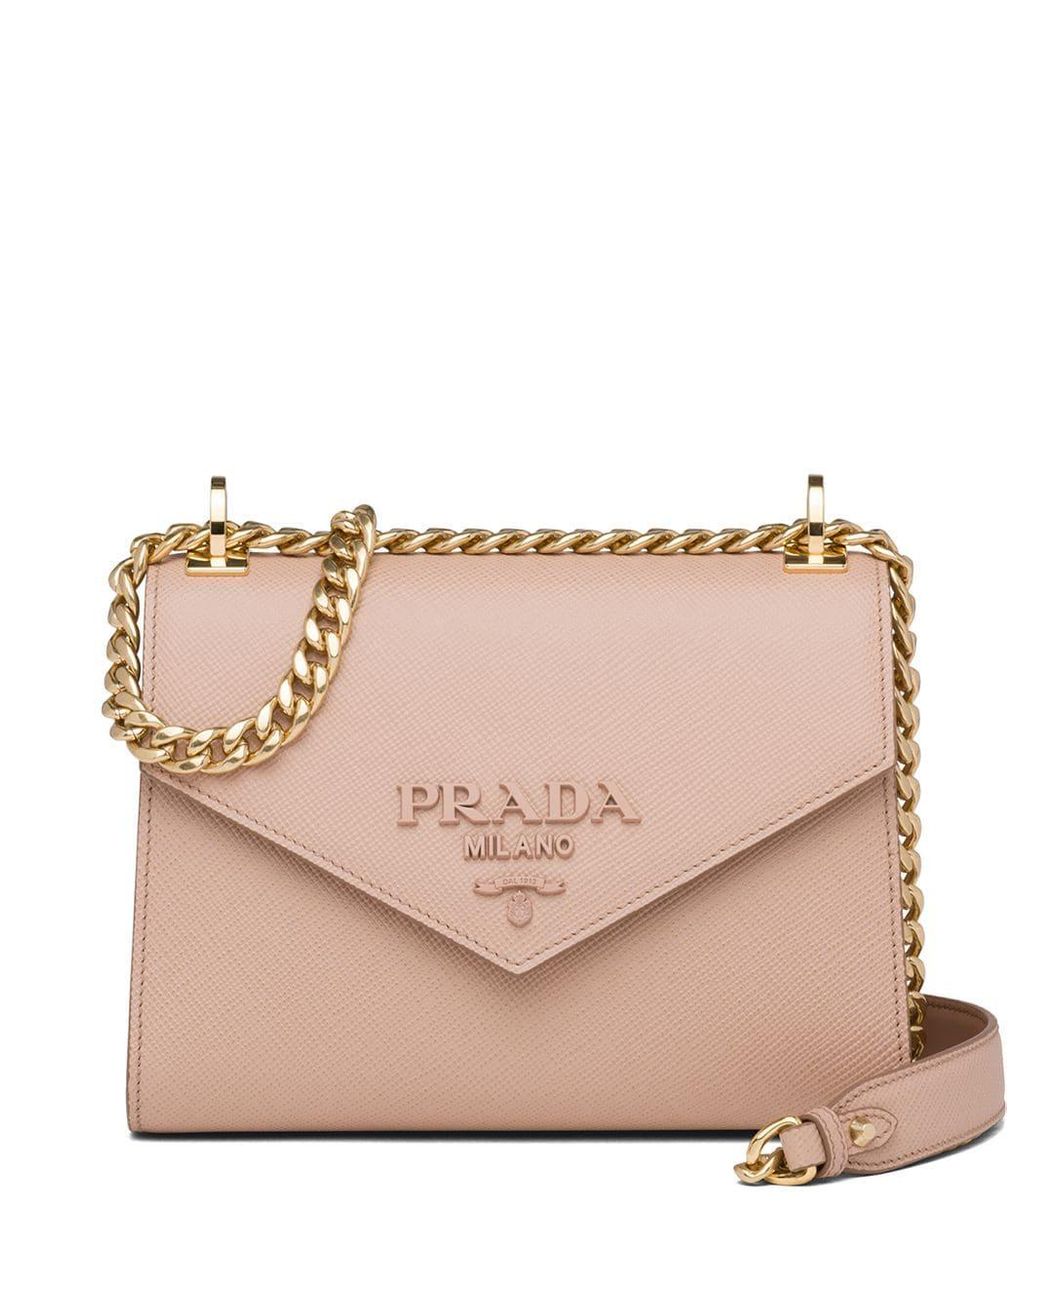 Prada novelty pouch pink shoulder bag Pouch diagonal hanging chain Ladies  unused